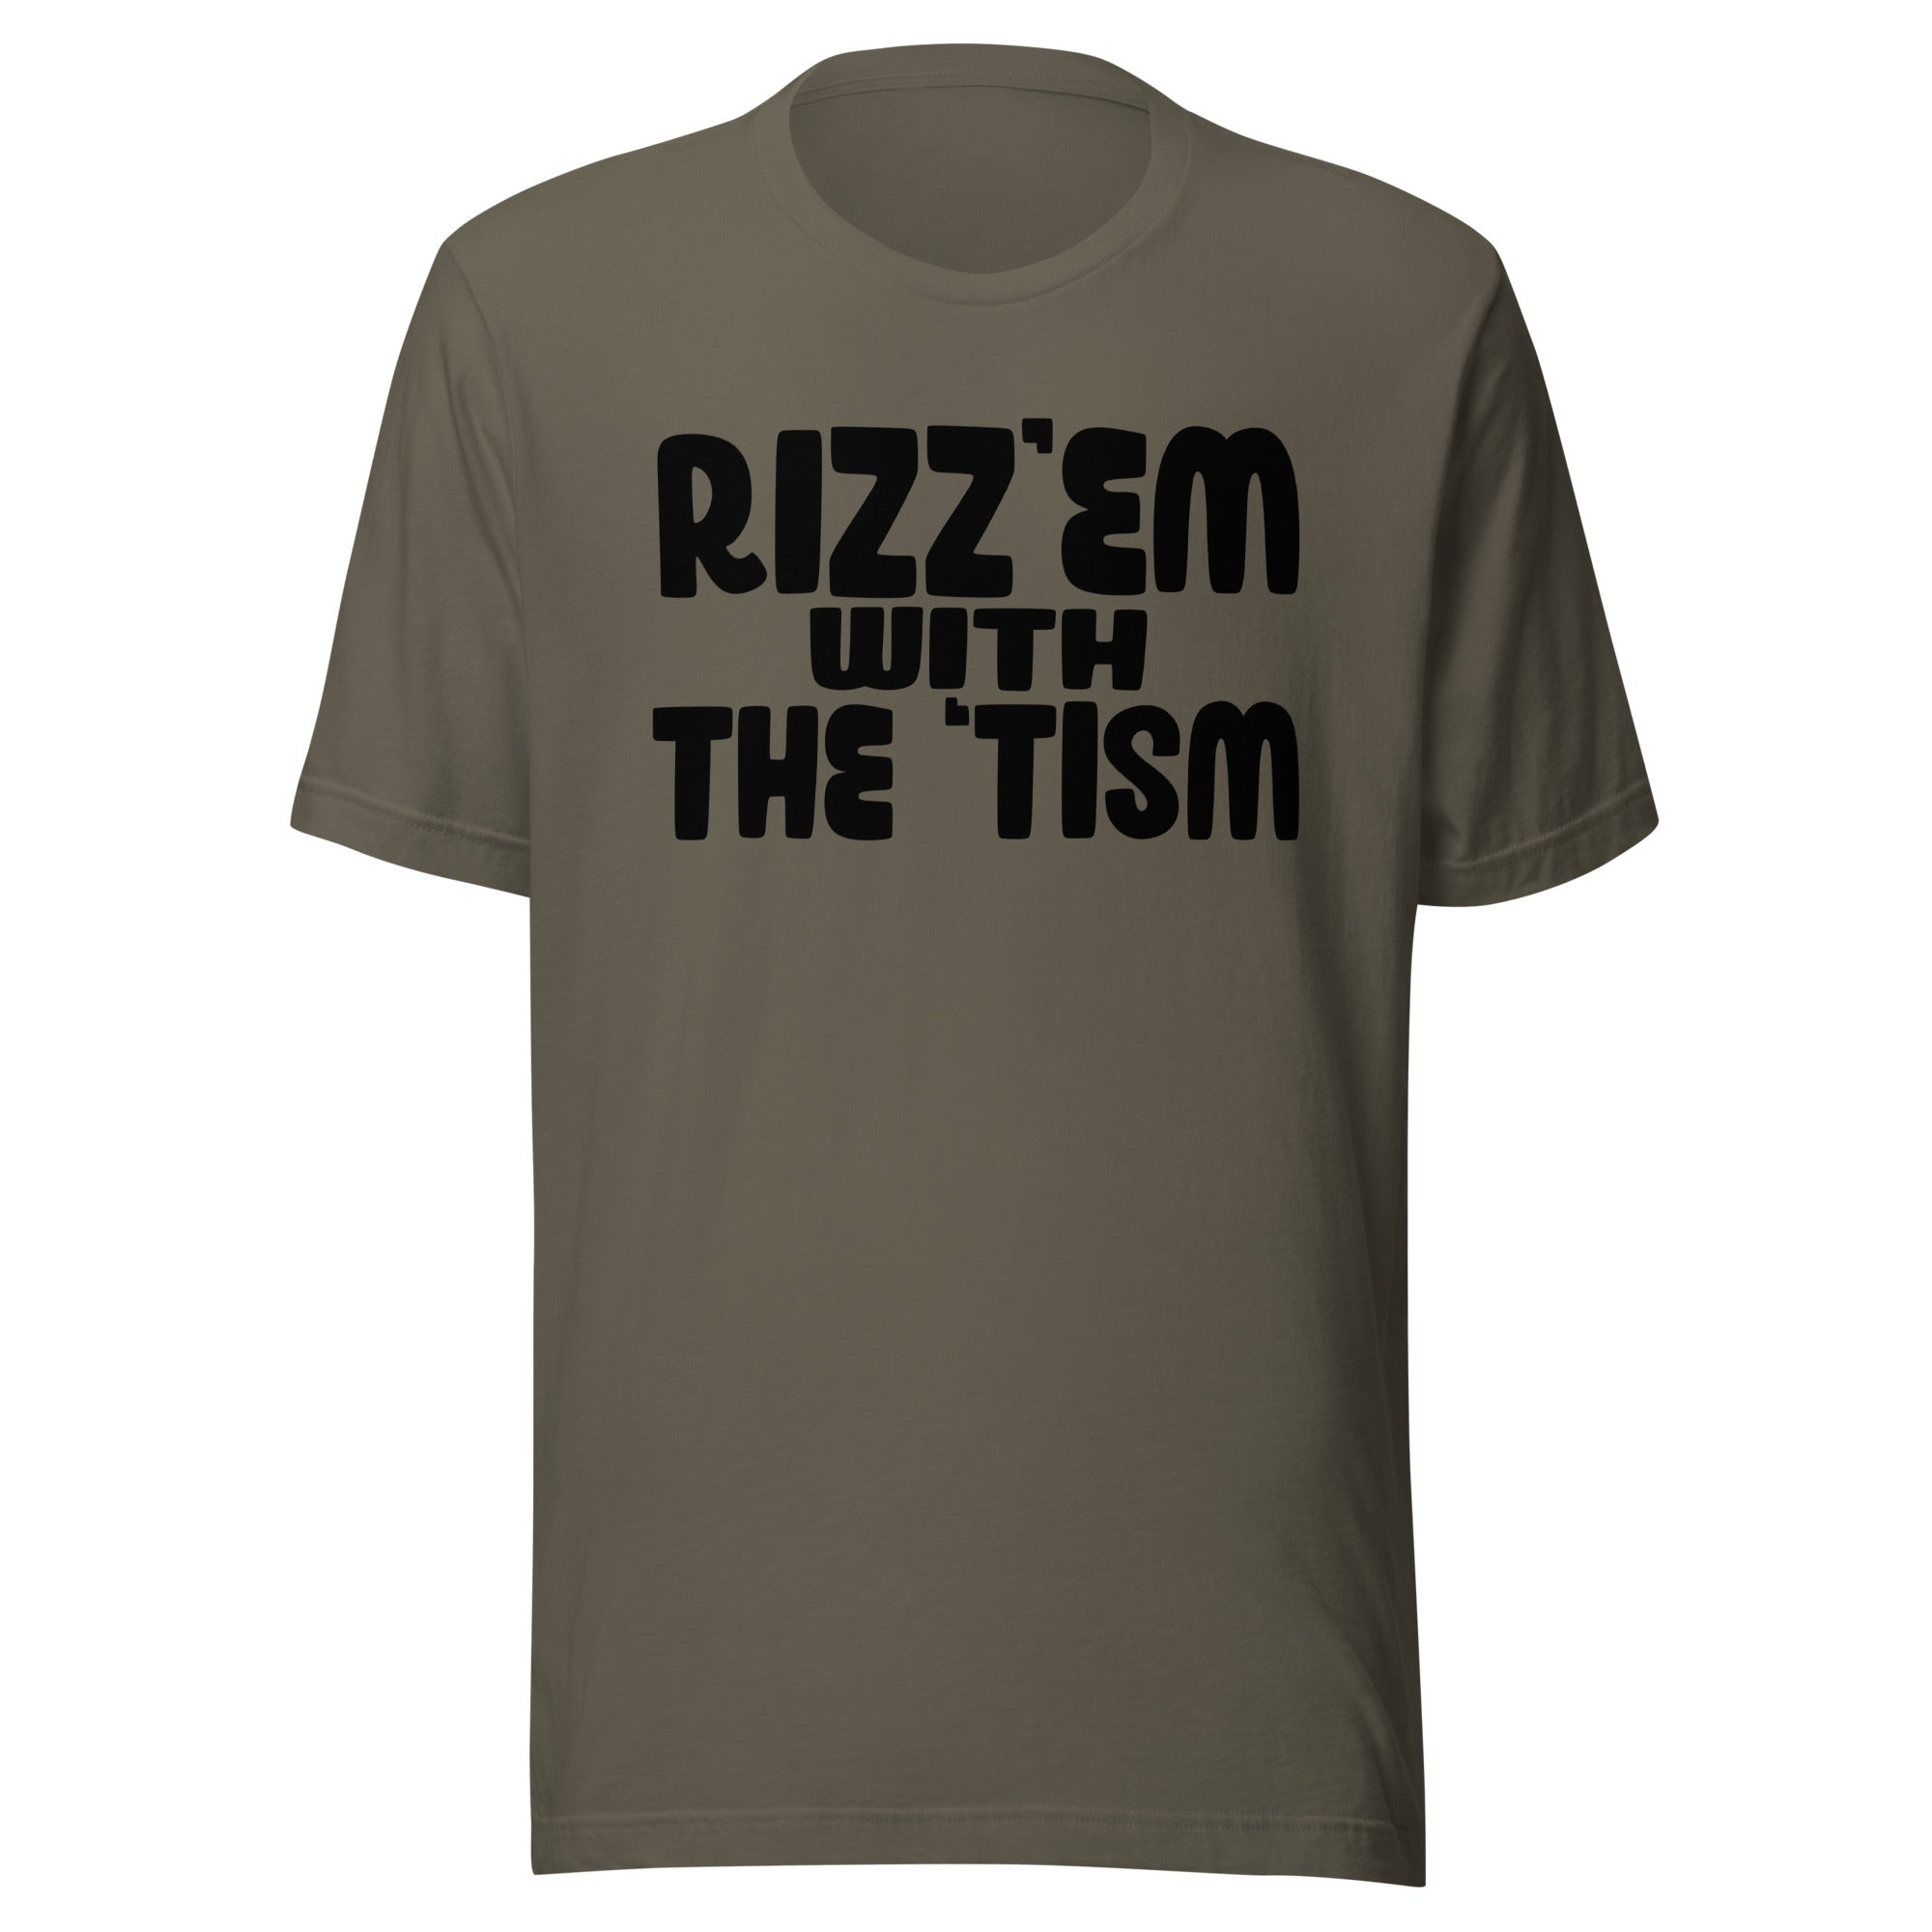 Rizz'em With The 'Tism - Unisex - t-shirt